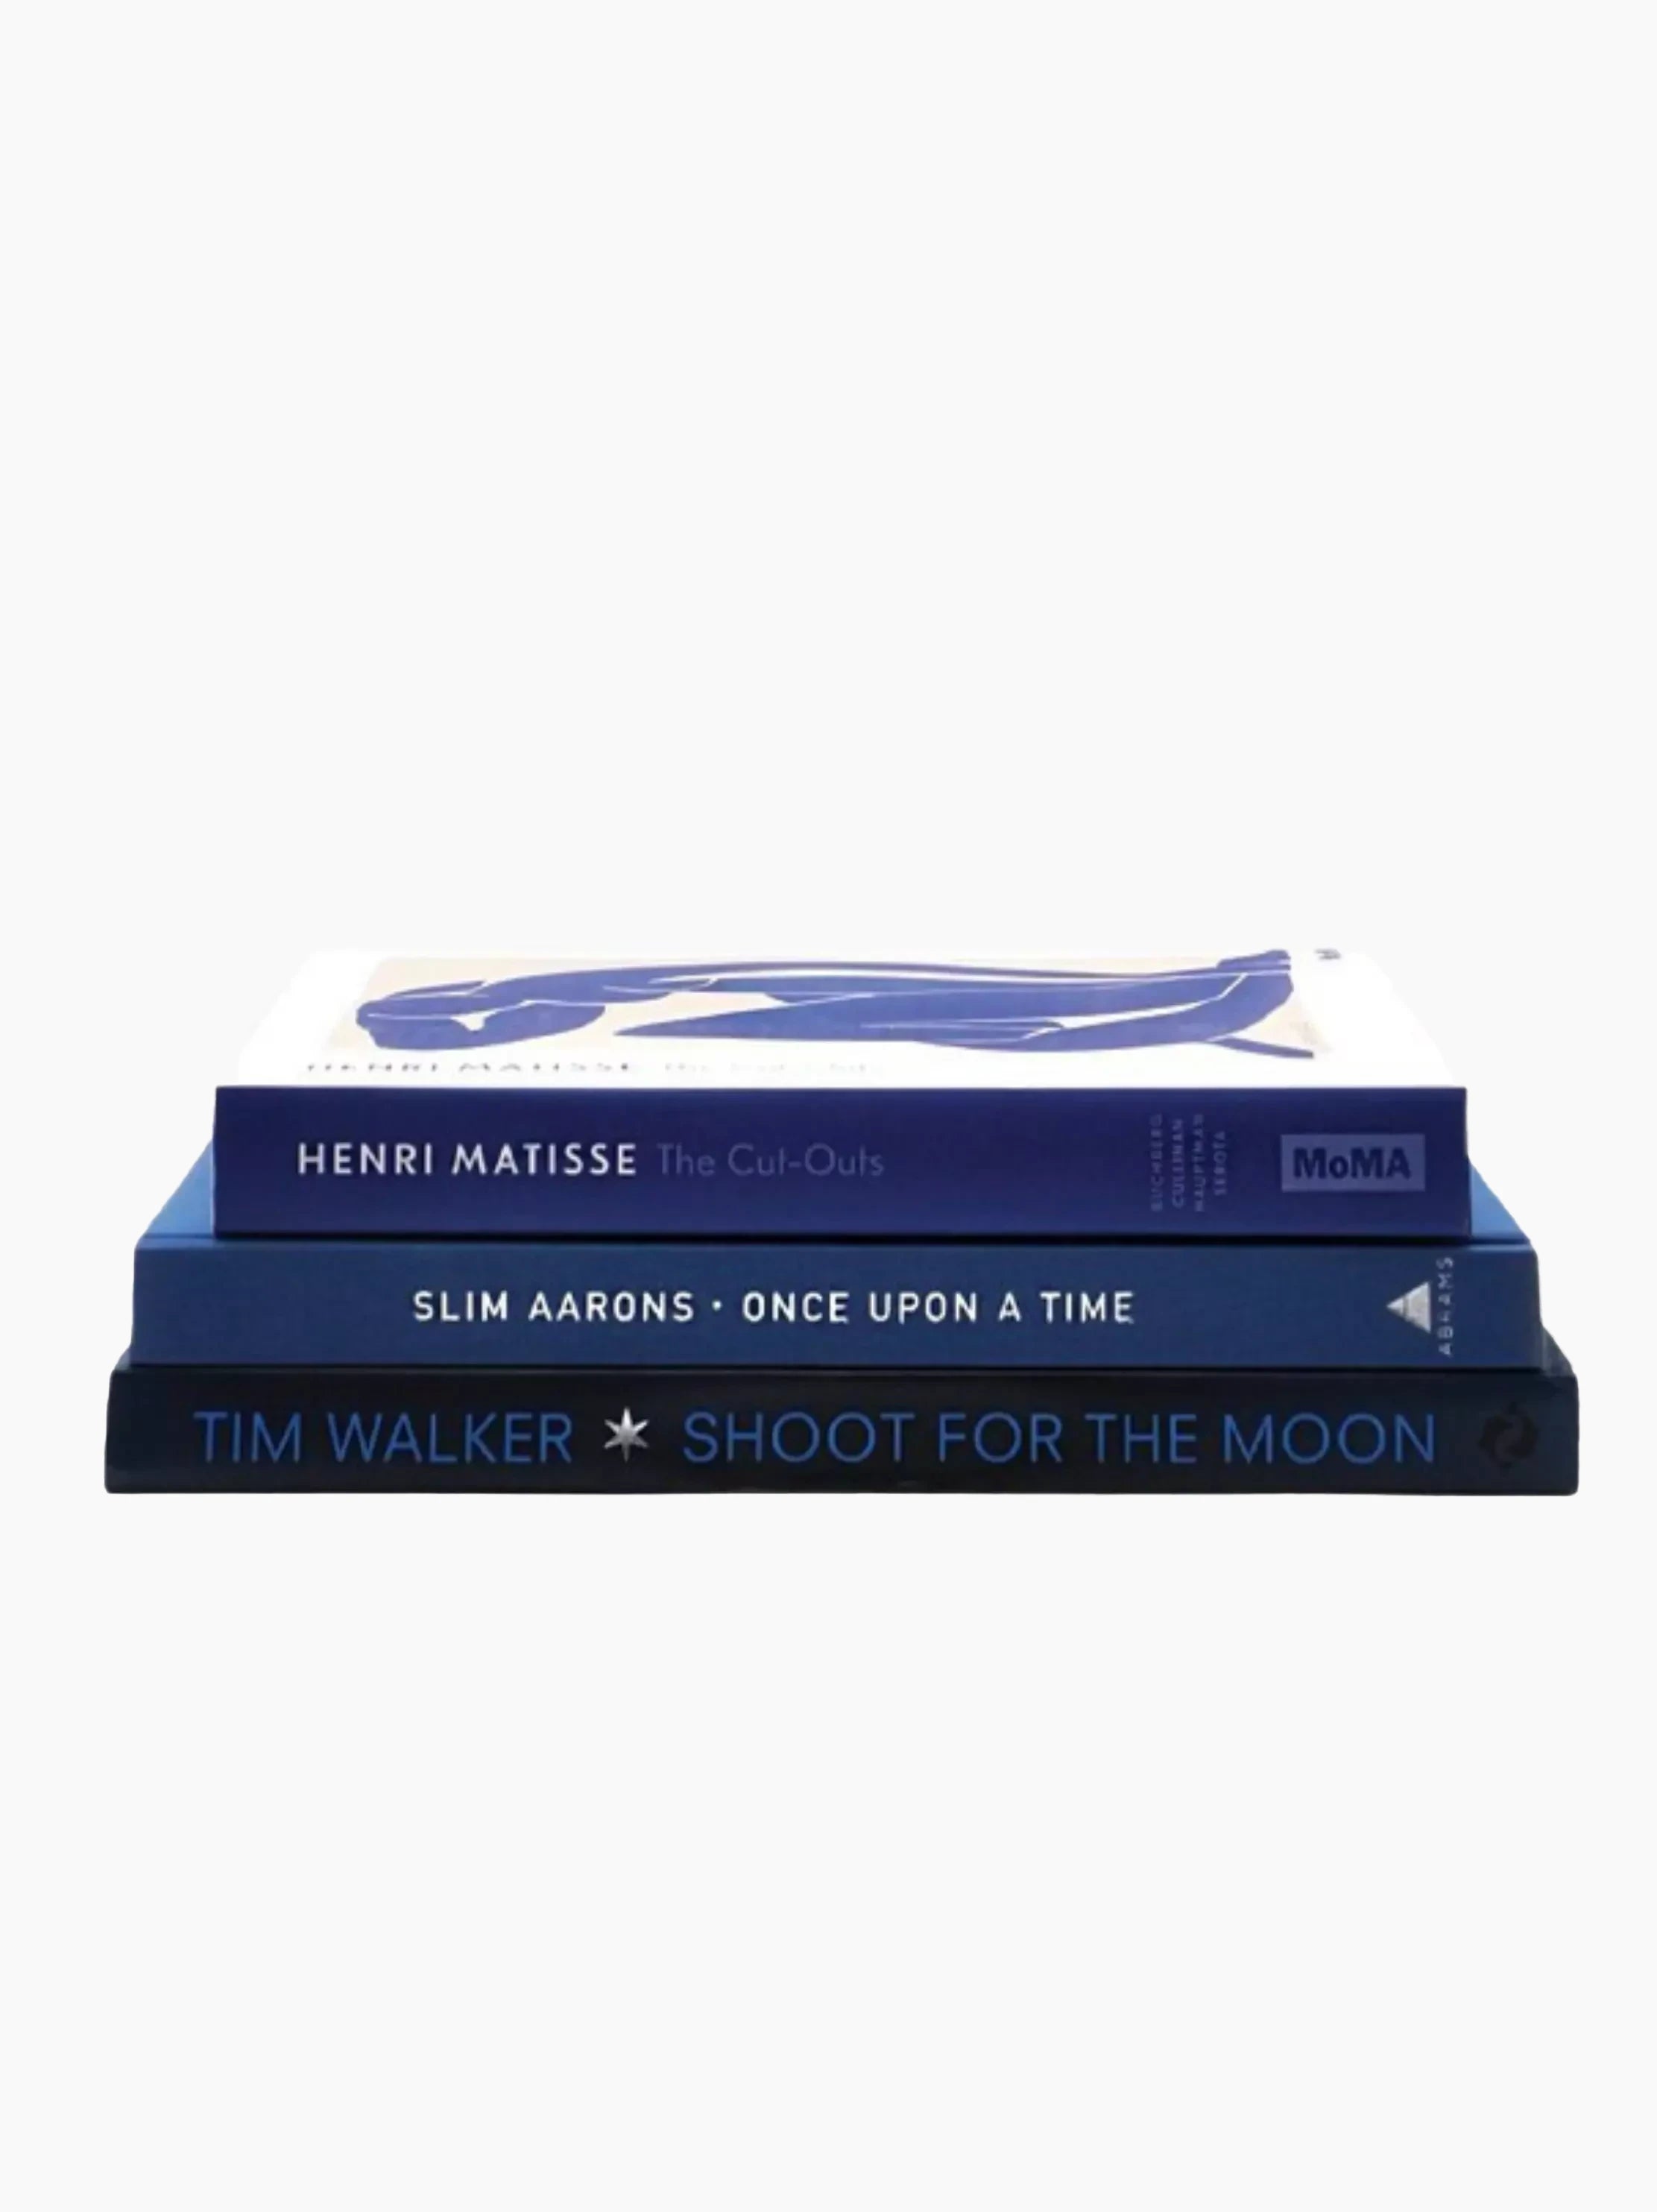 The Blue Coffee Table Book Stack